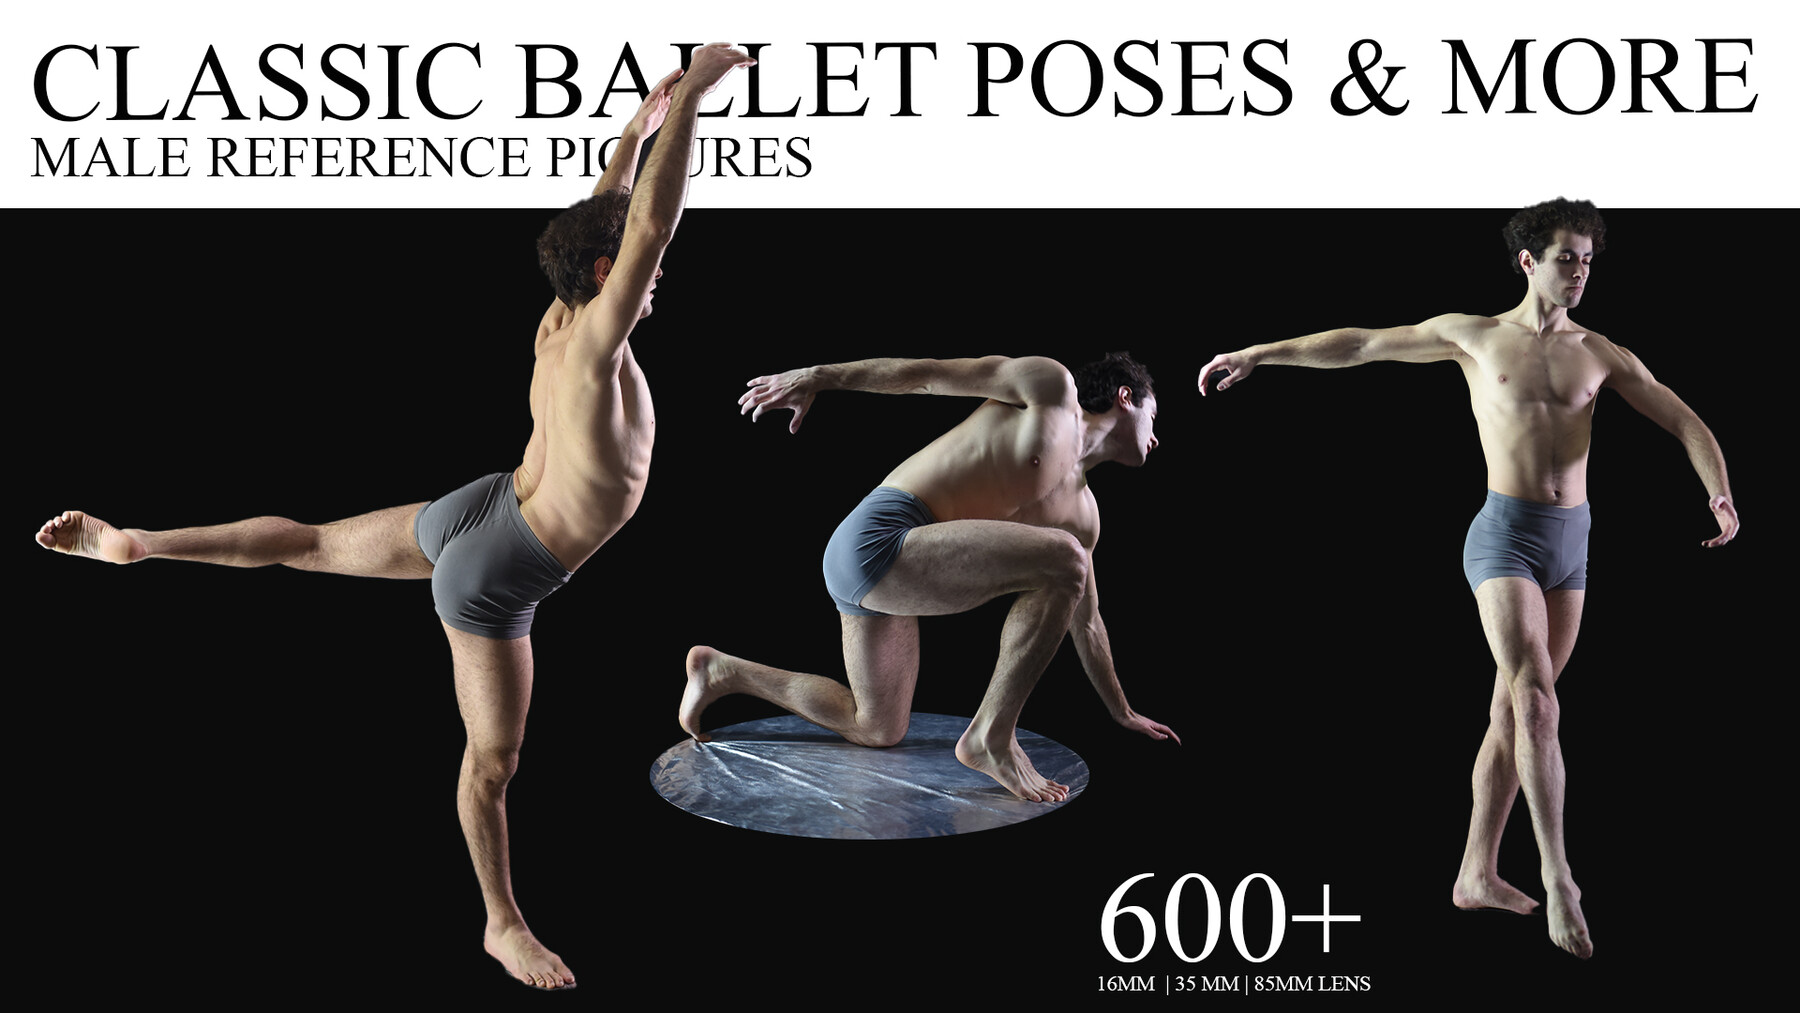 ArtStation - MALE CLASSIC Ballet POSES & MORE [ANATOMY REFERENCE IMAGES]